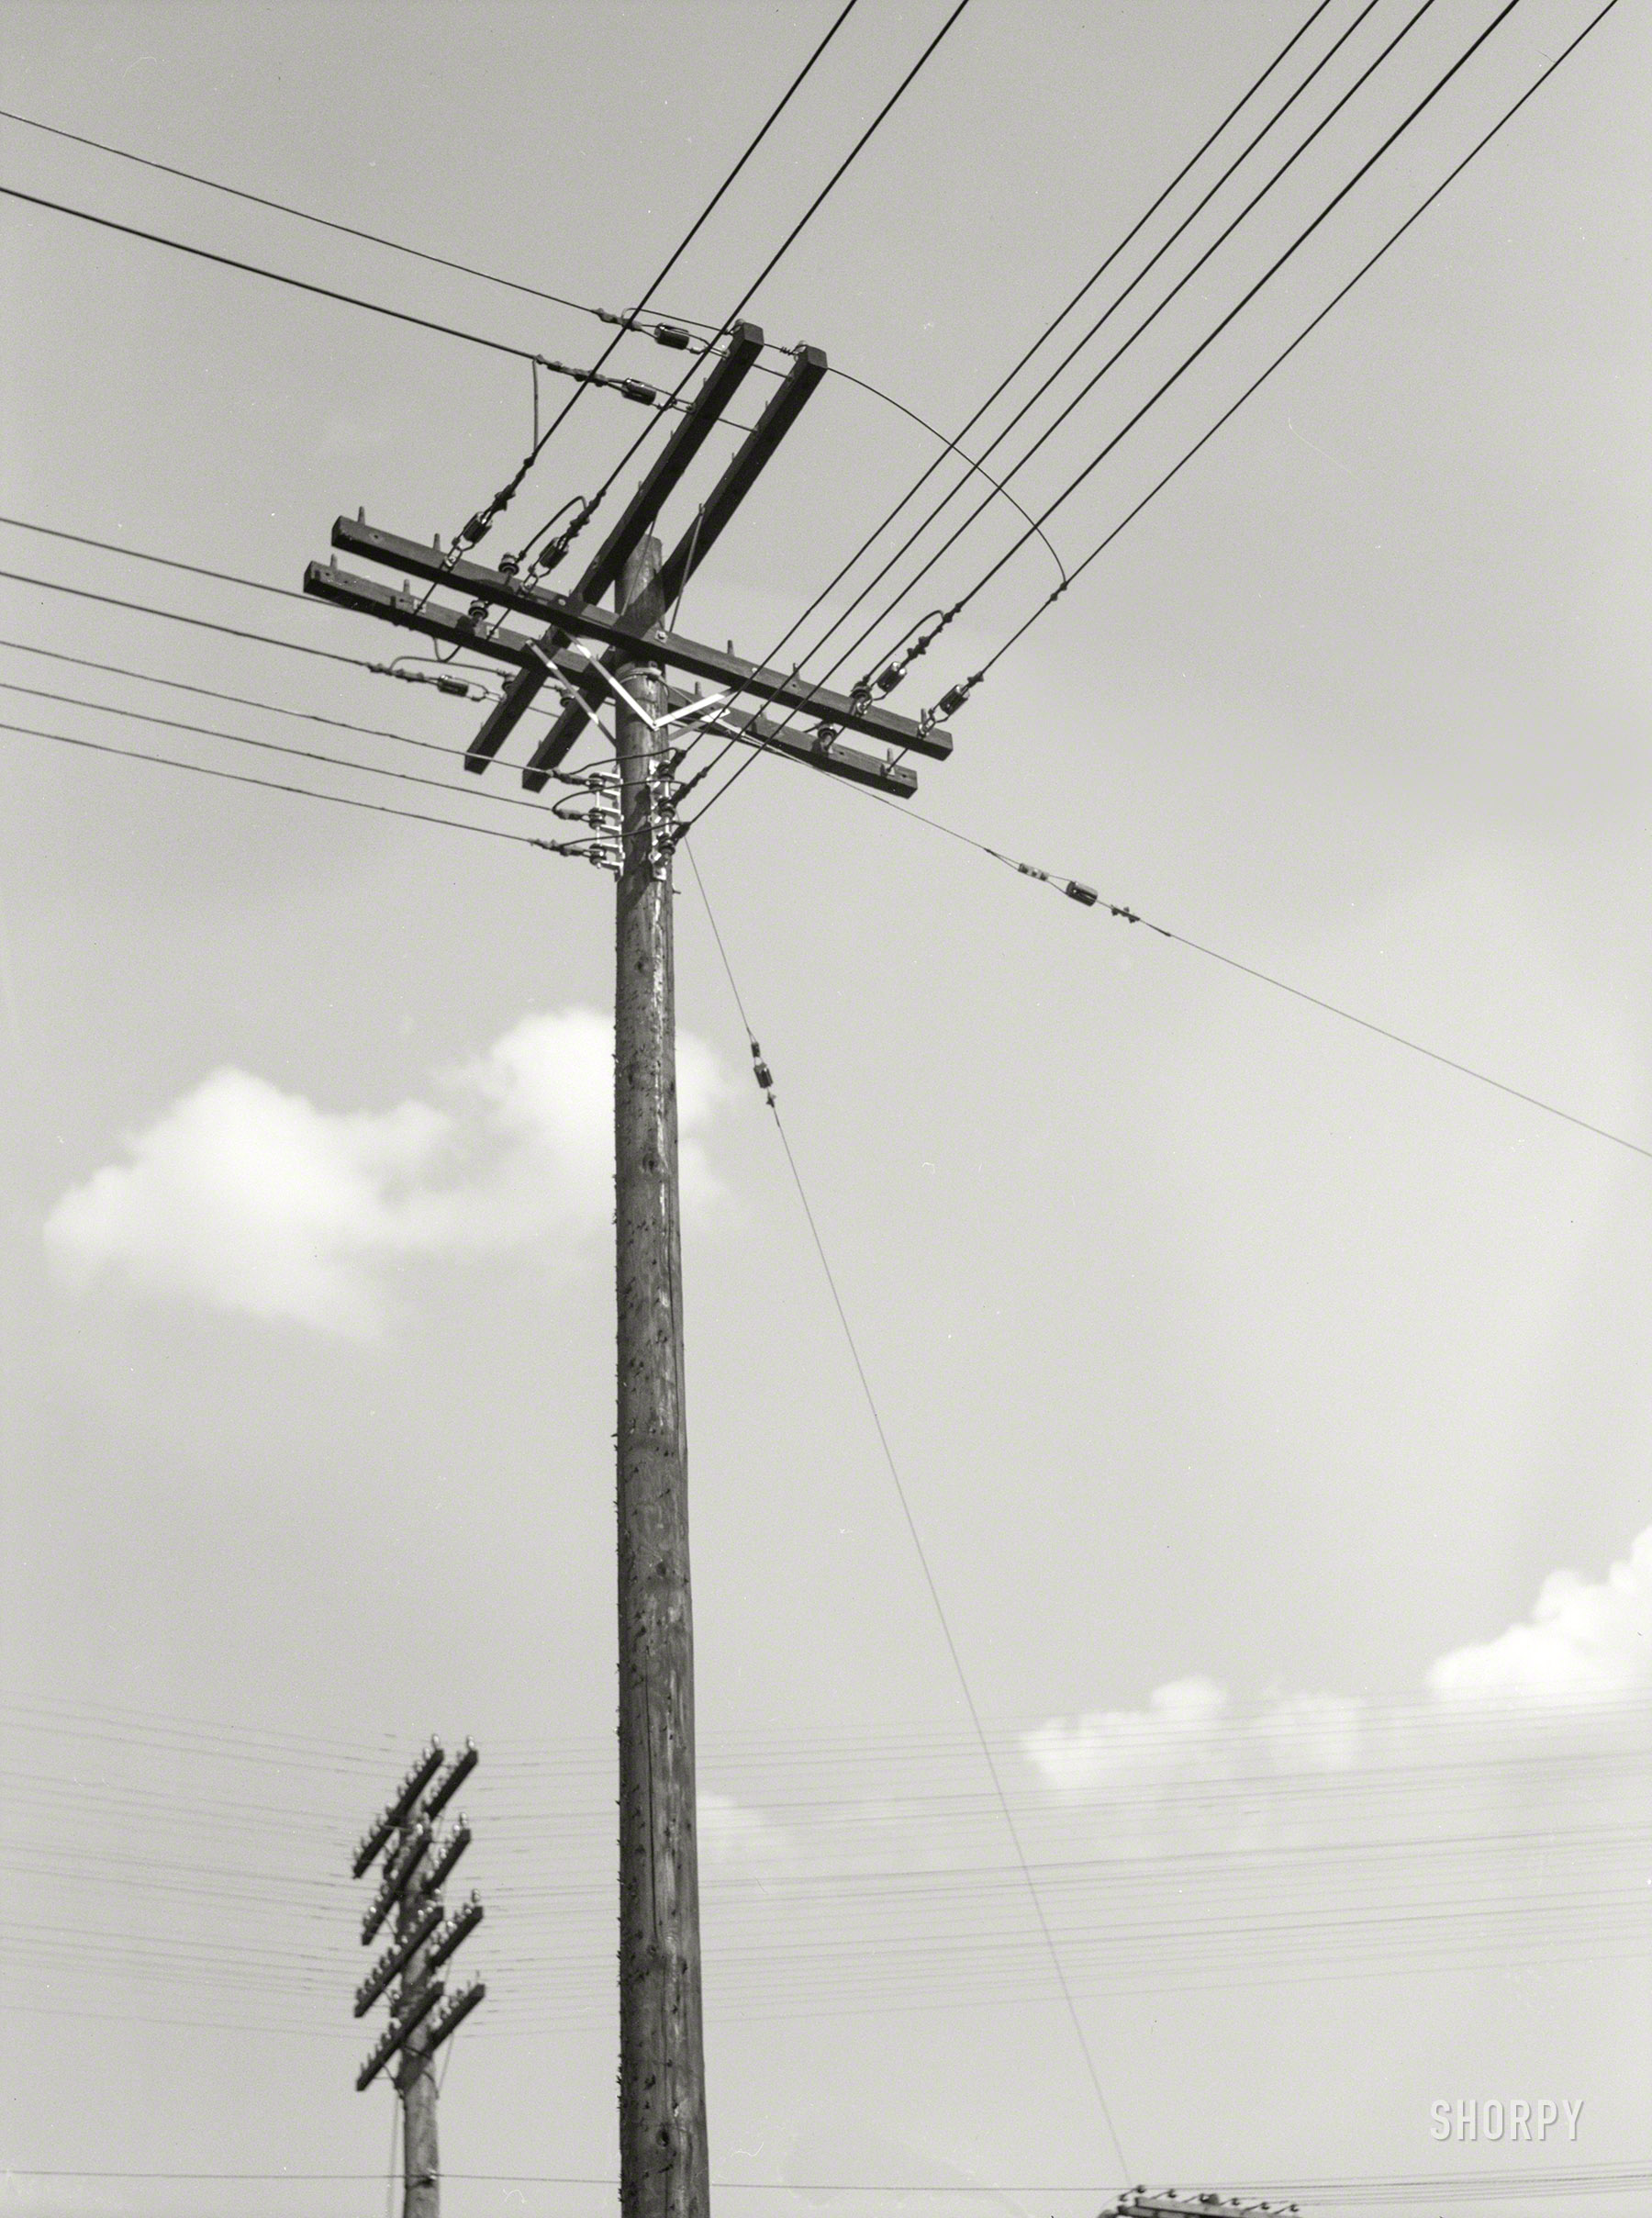 July 1937. "Electrical and telephone wires. Rosslyn, Virginia." Medium format negative by John Vachon for the Farm Security Administration. View full size.